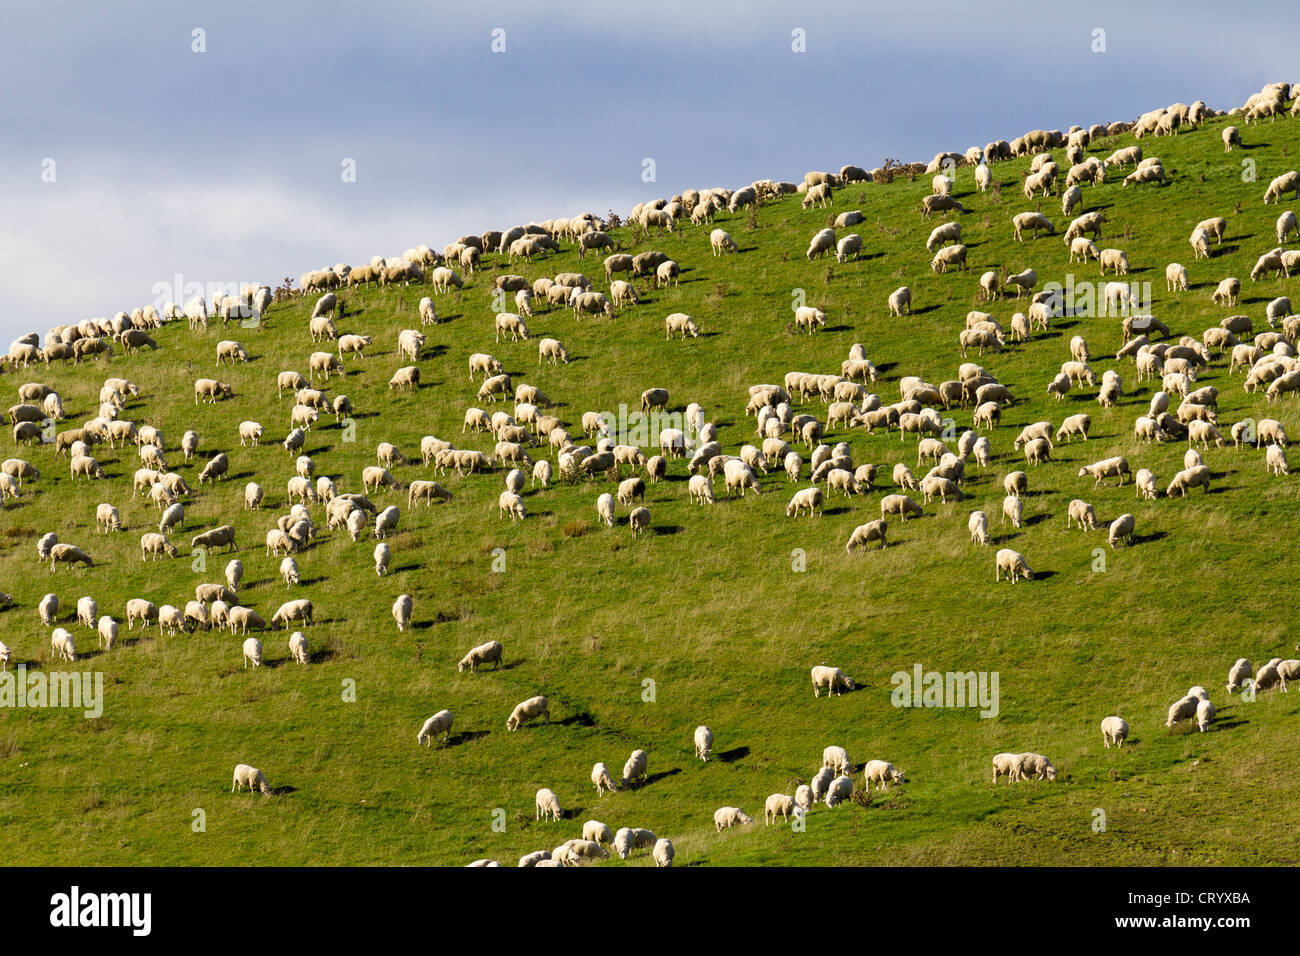 A hill full of sheep, South Island of New Zealand Stock Photo